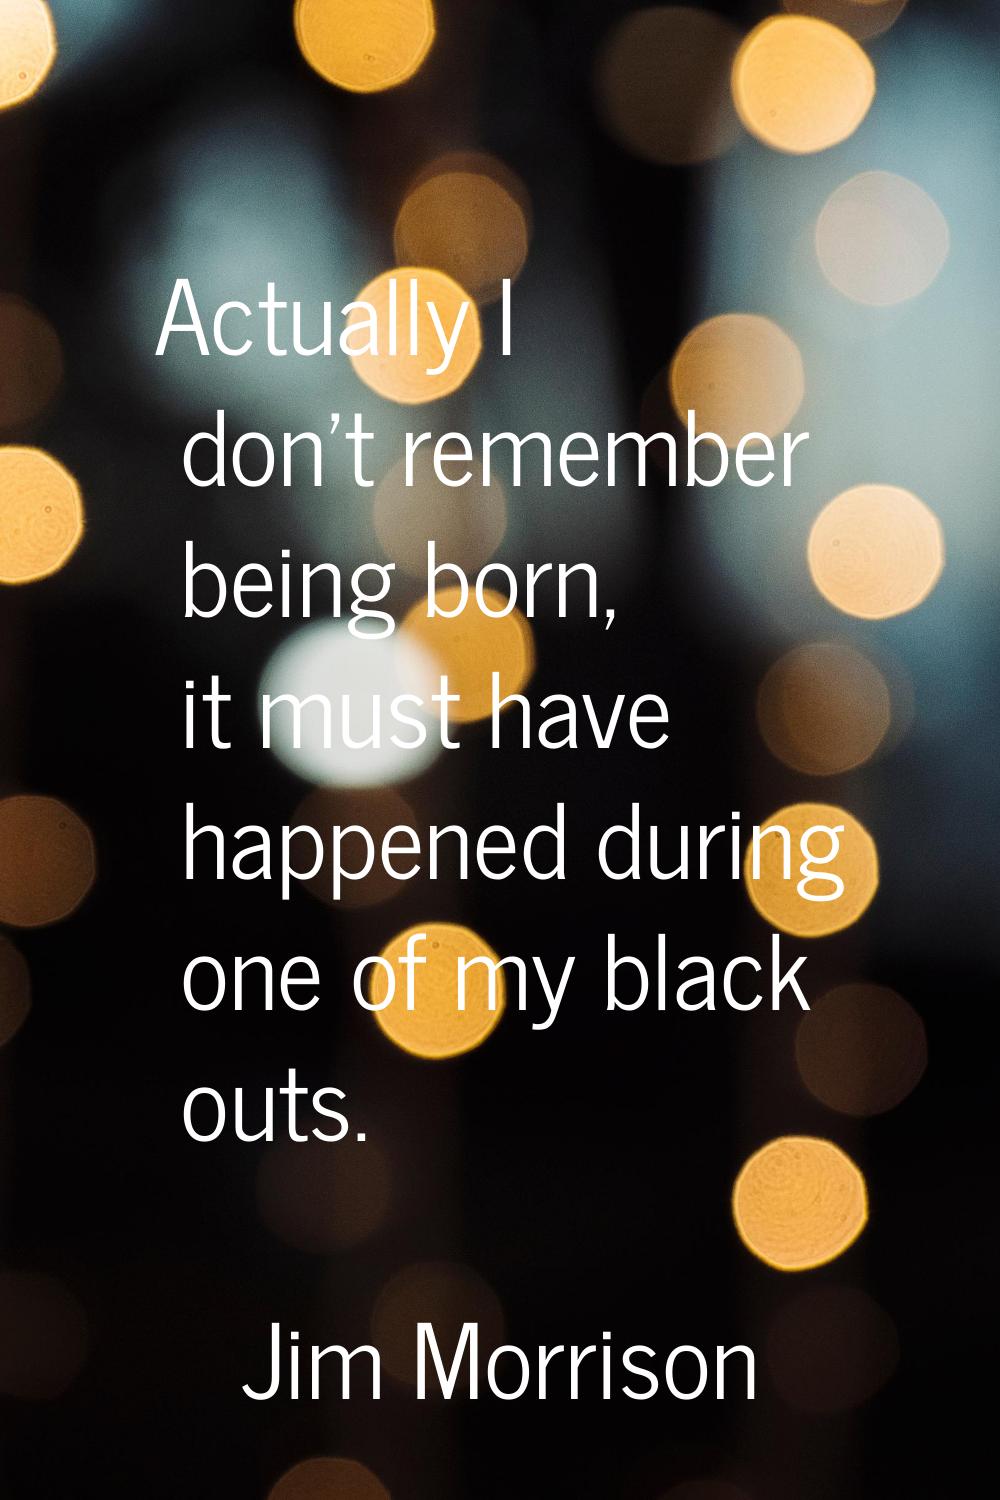 Actually I don't remember being born, it must have happened during one of my black outs.